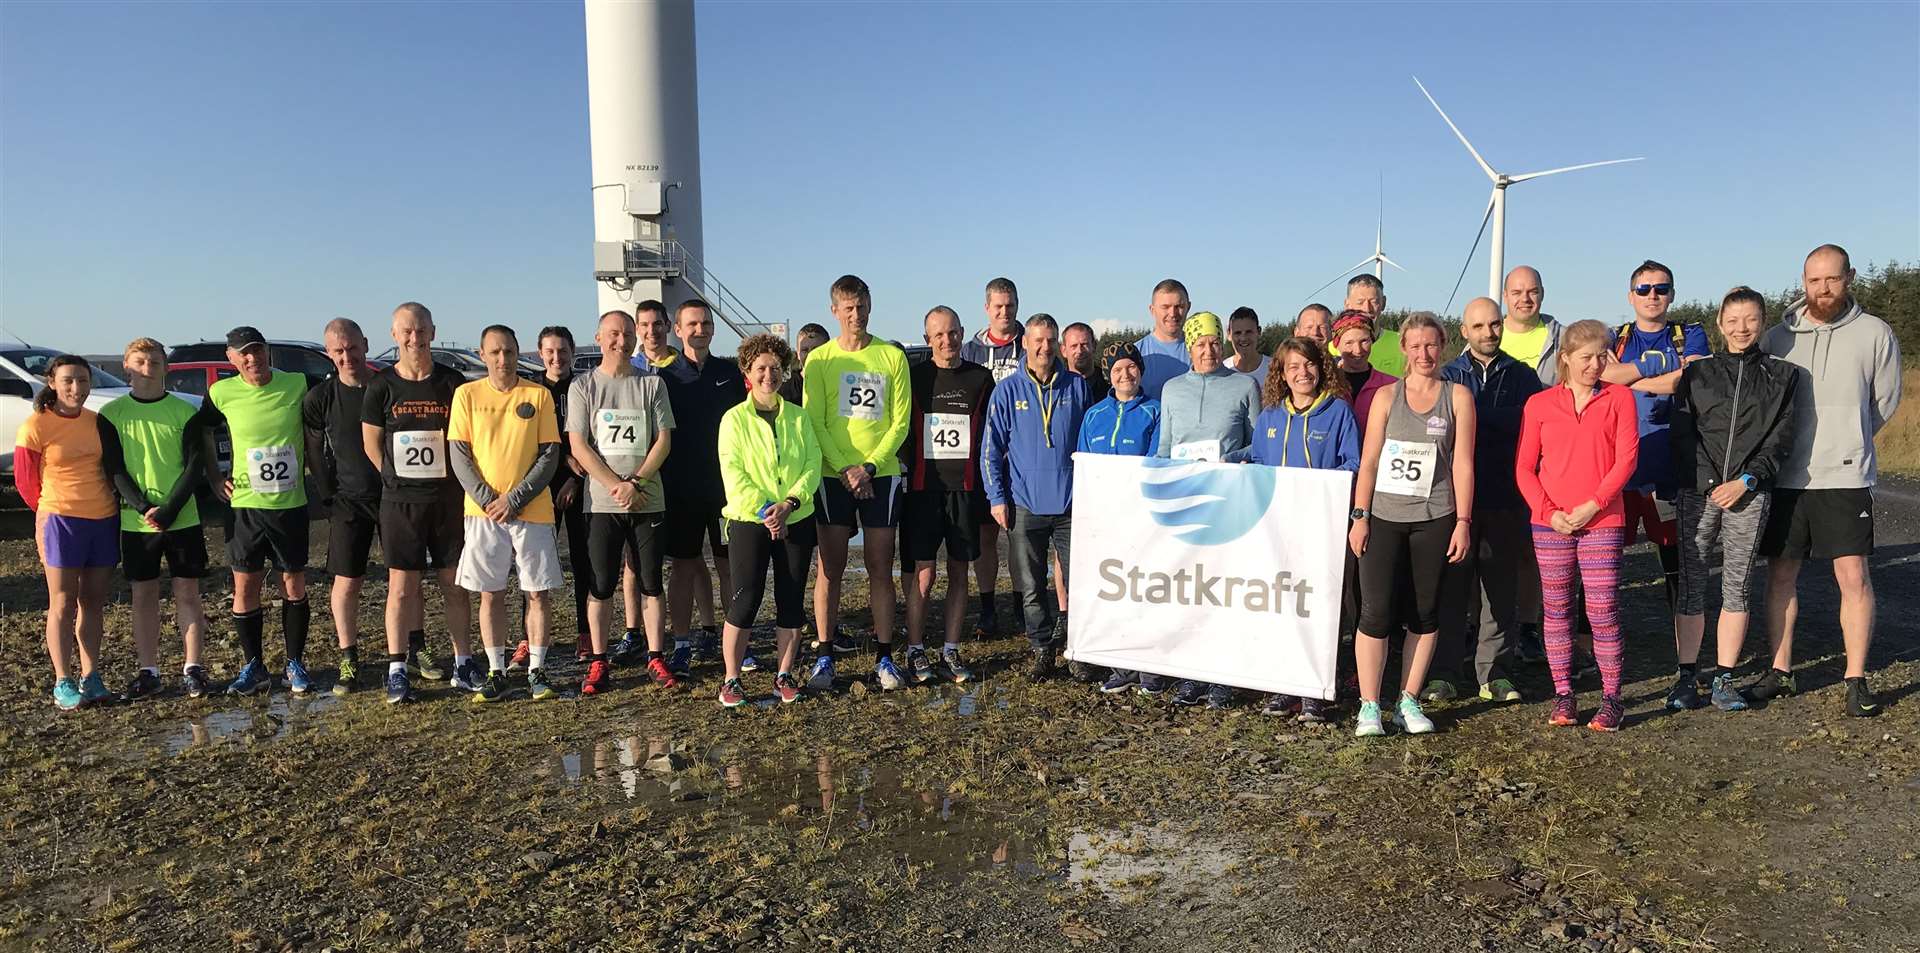 Runners who took part in the Statkraft Winter Trail Series event at Baillie Wind Farm.